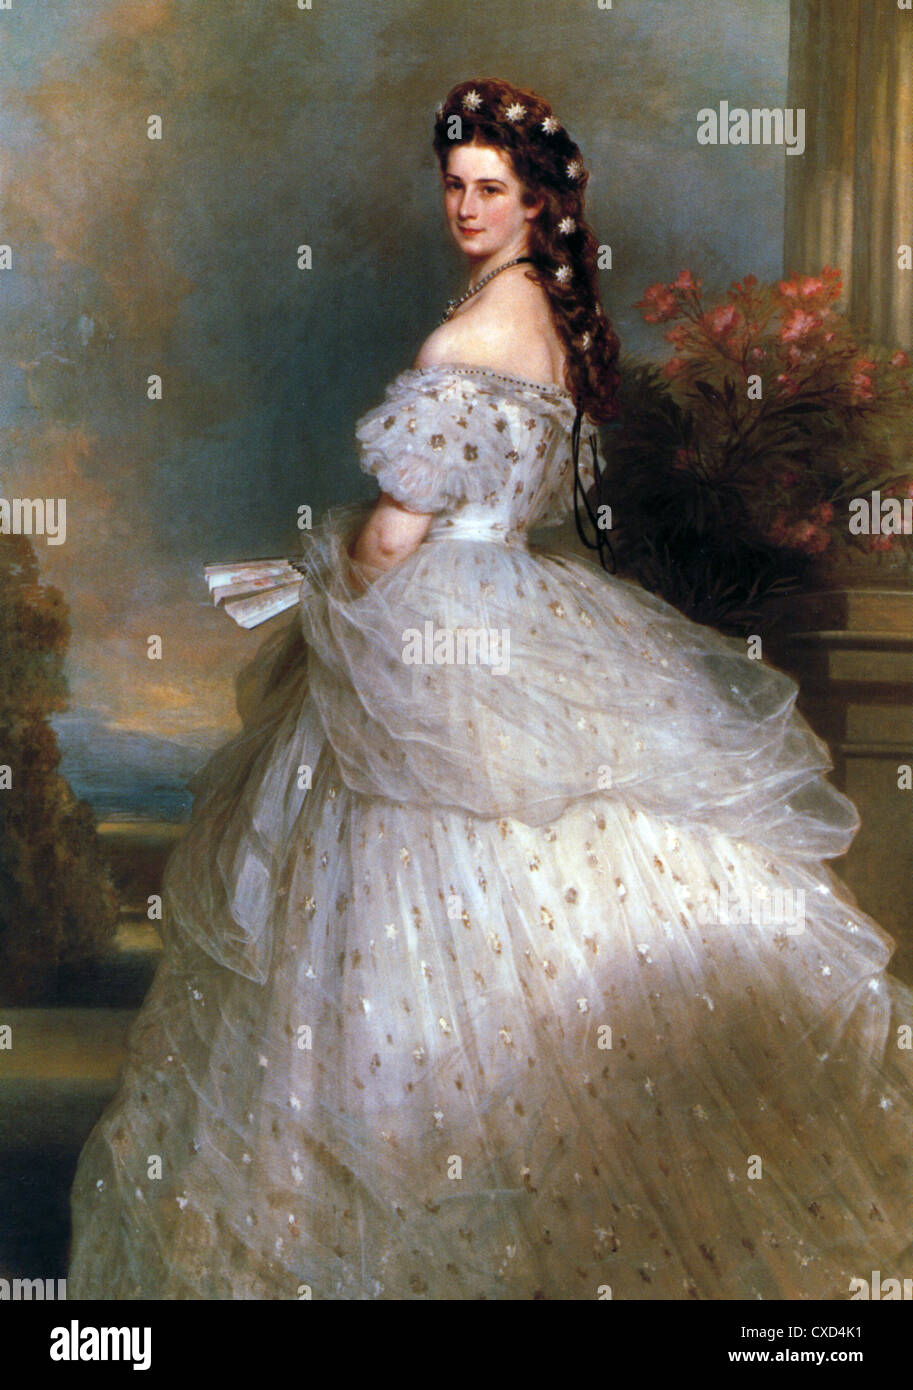 EMPRESS ELIZABETH OF AUSTRIA (1837-1898) also Queen of Hungary painted by Winterhalter in 1865 Stock Photo